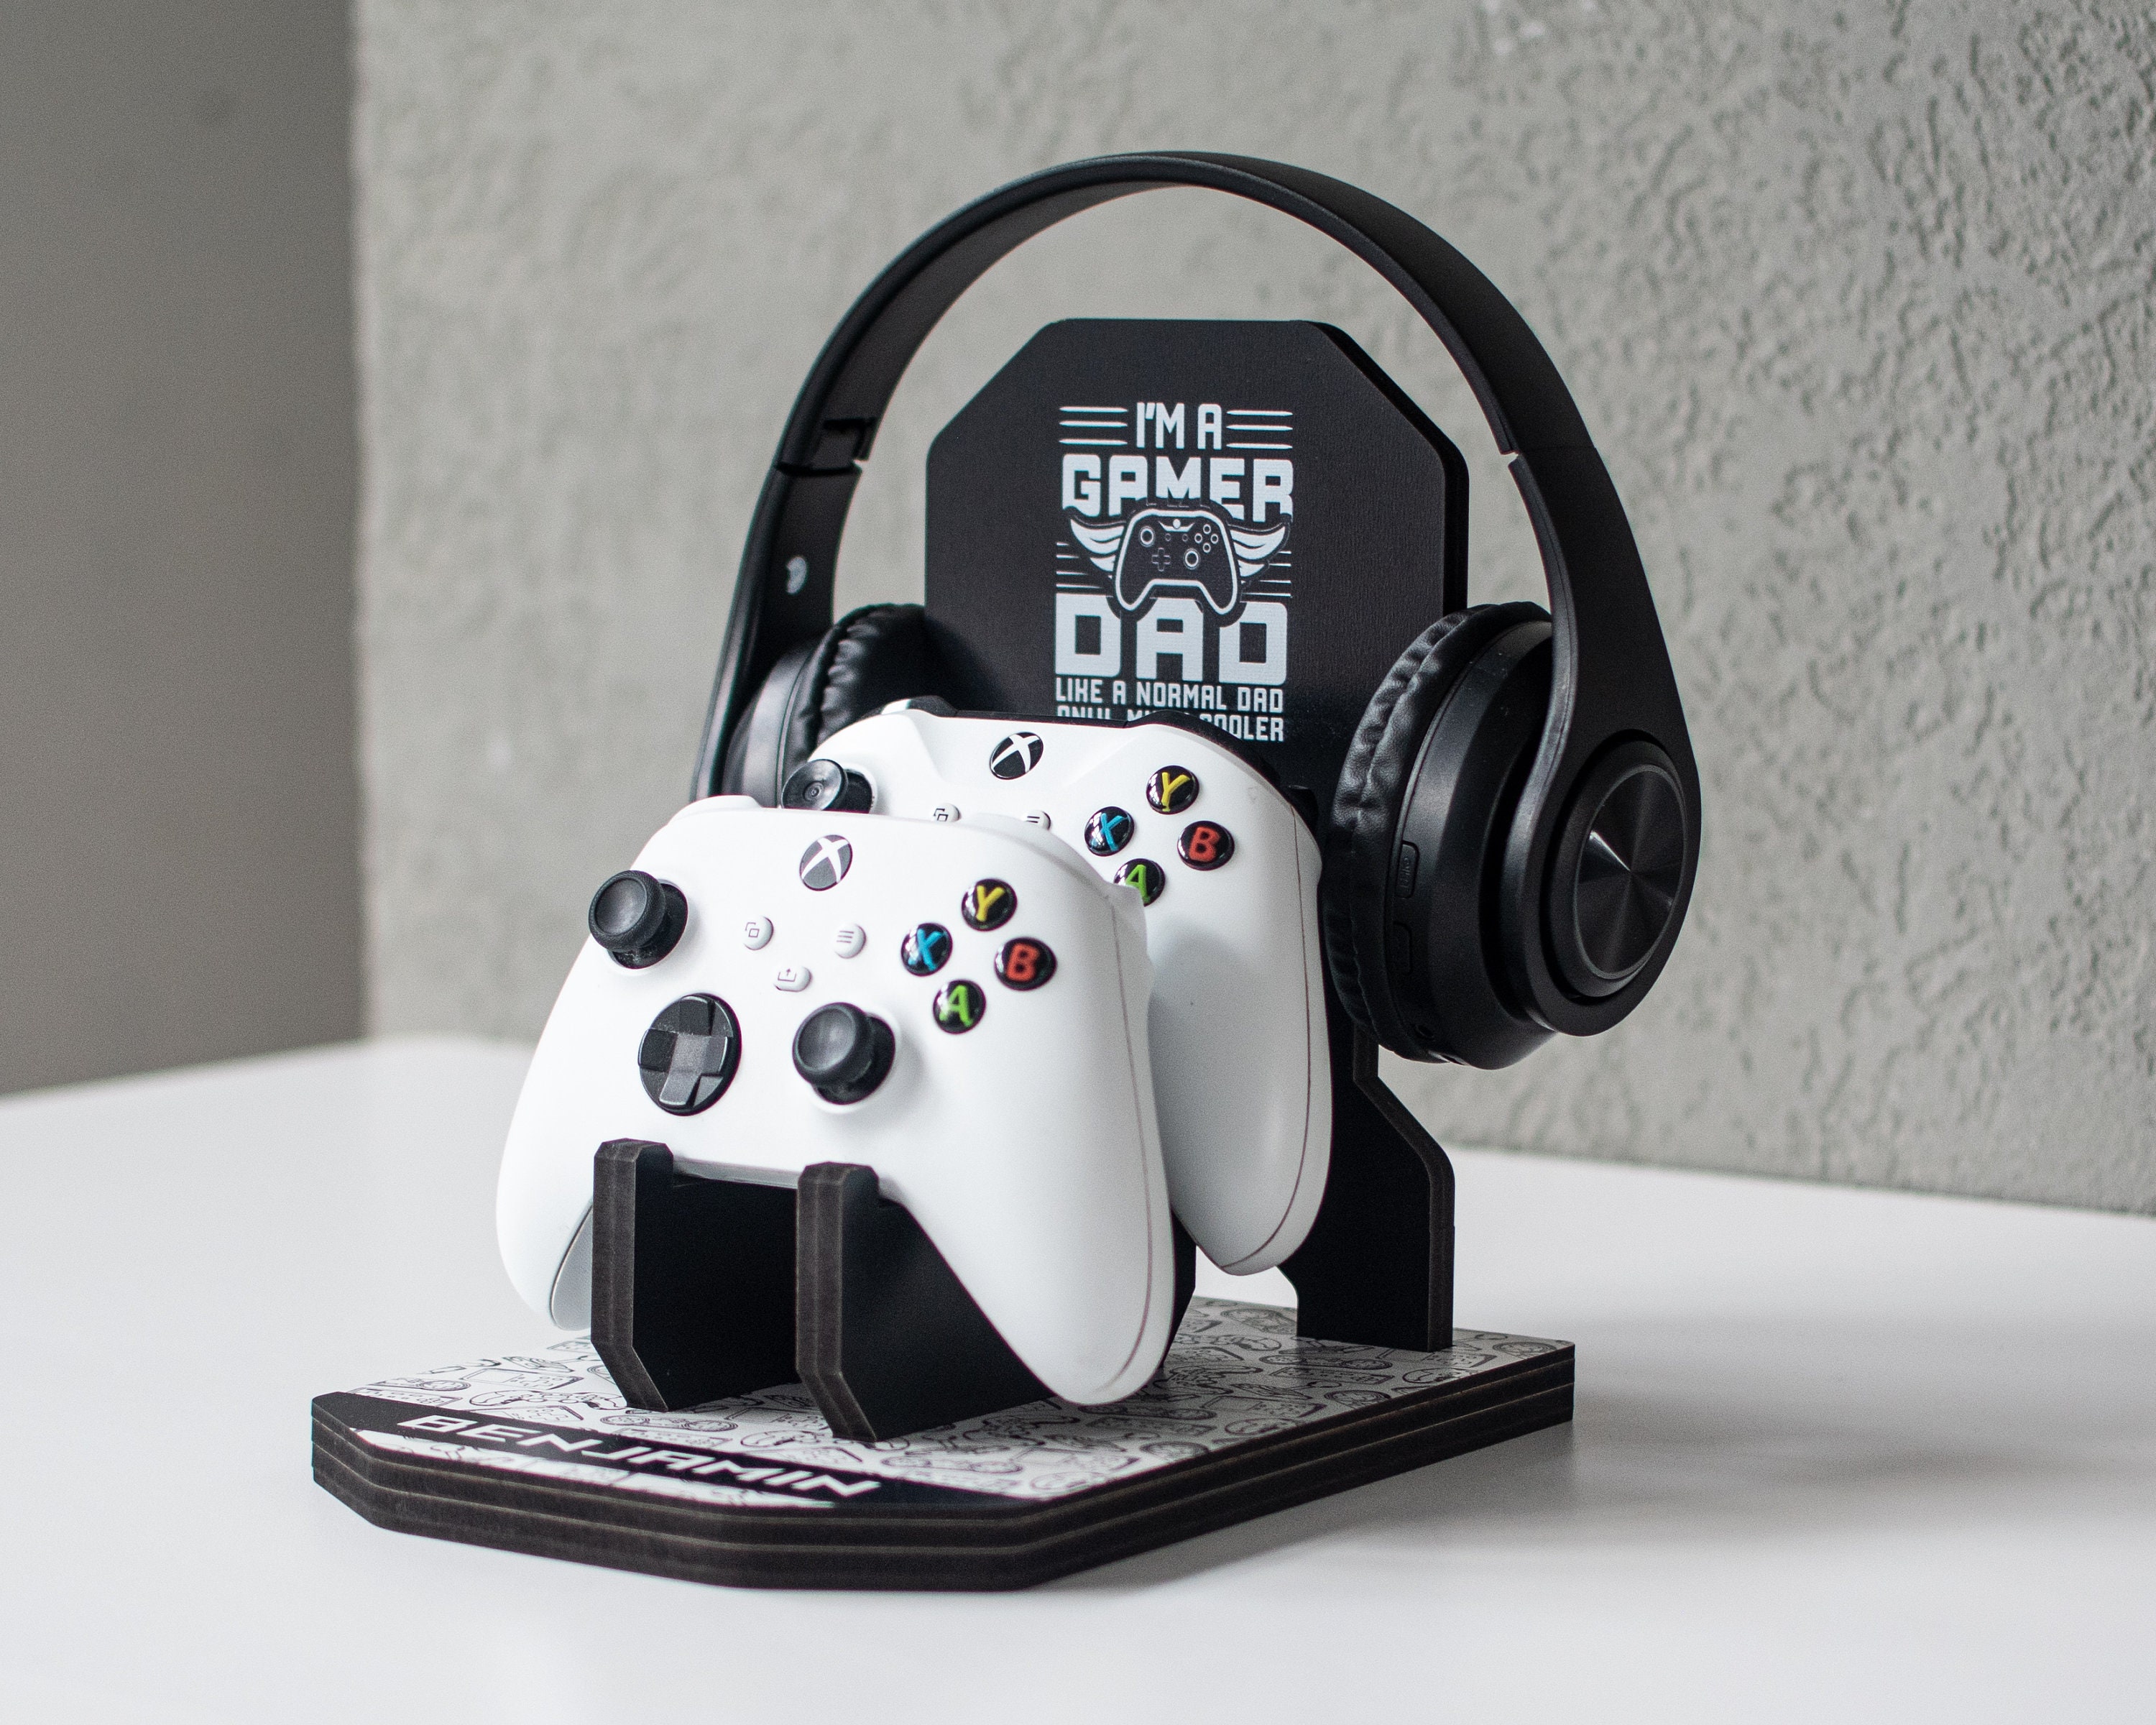 Gifts for gamers: The only gifts gamers will put their controllers down for  